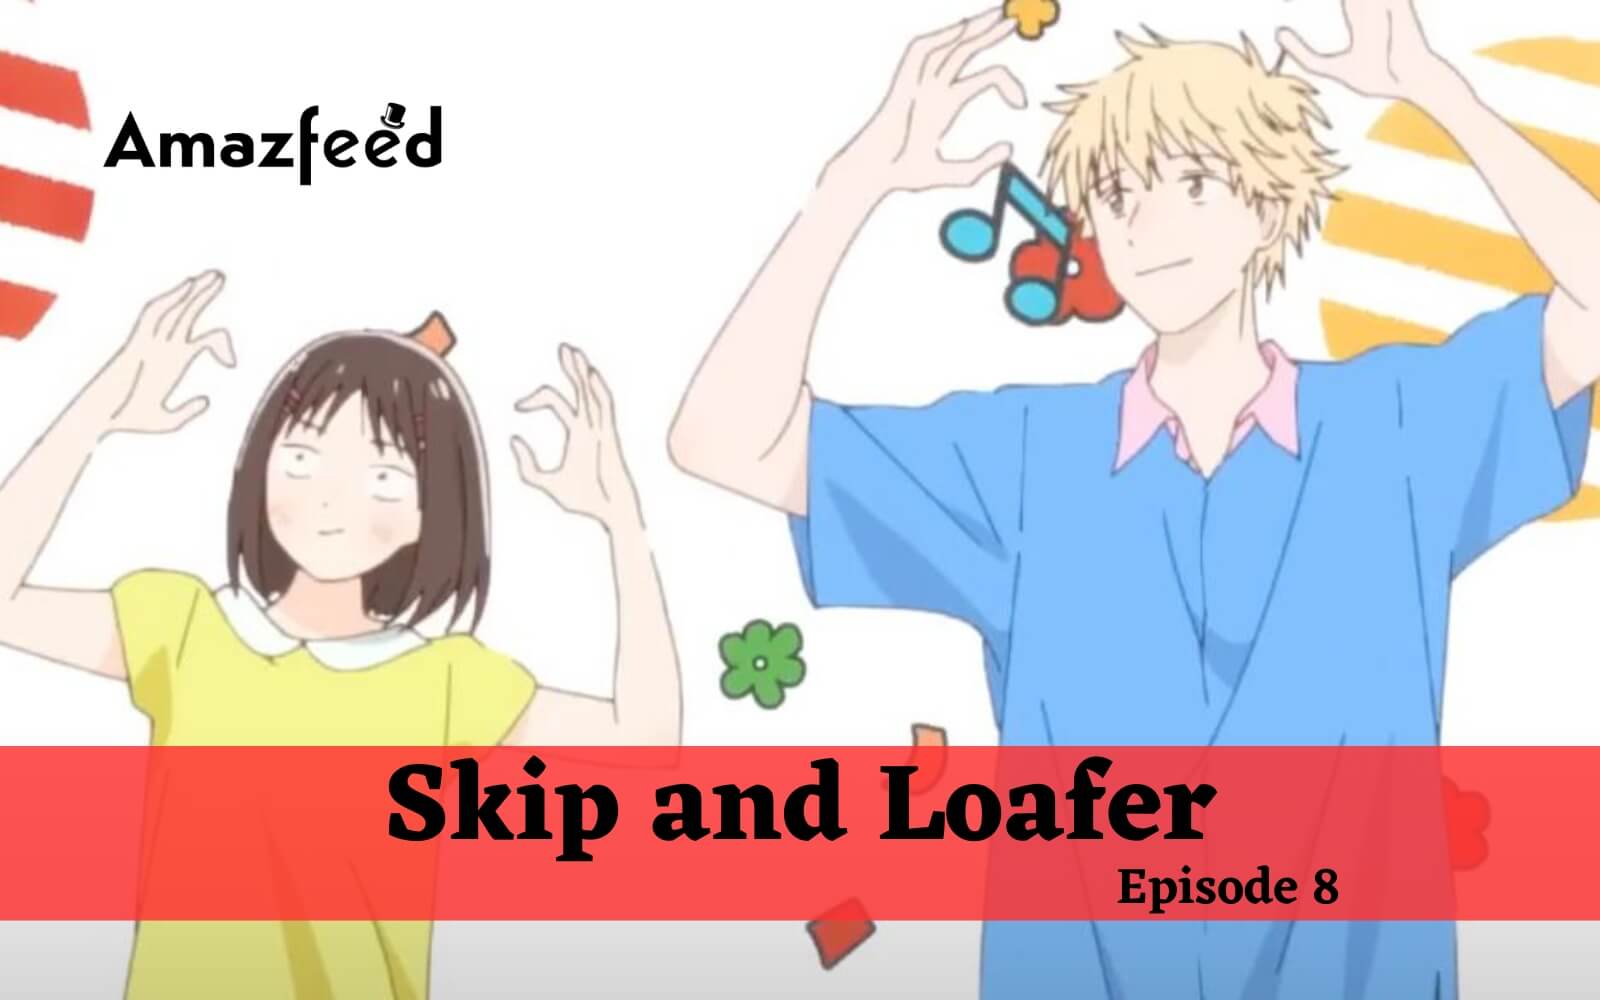 Skip and Loafer: Skip And Loafer Episode 12: Release Date, Where To Watch,  What To Expect, Countdown, And More